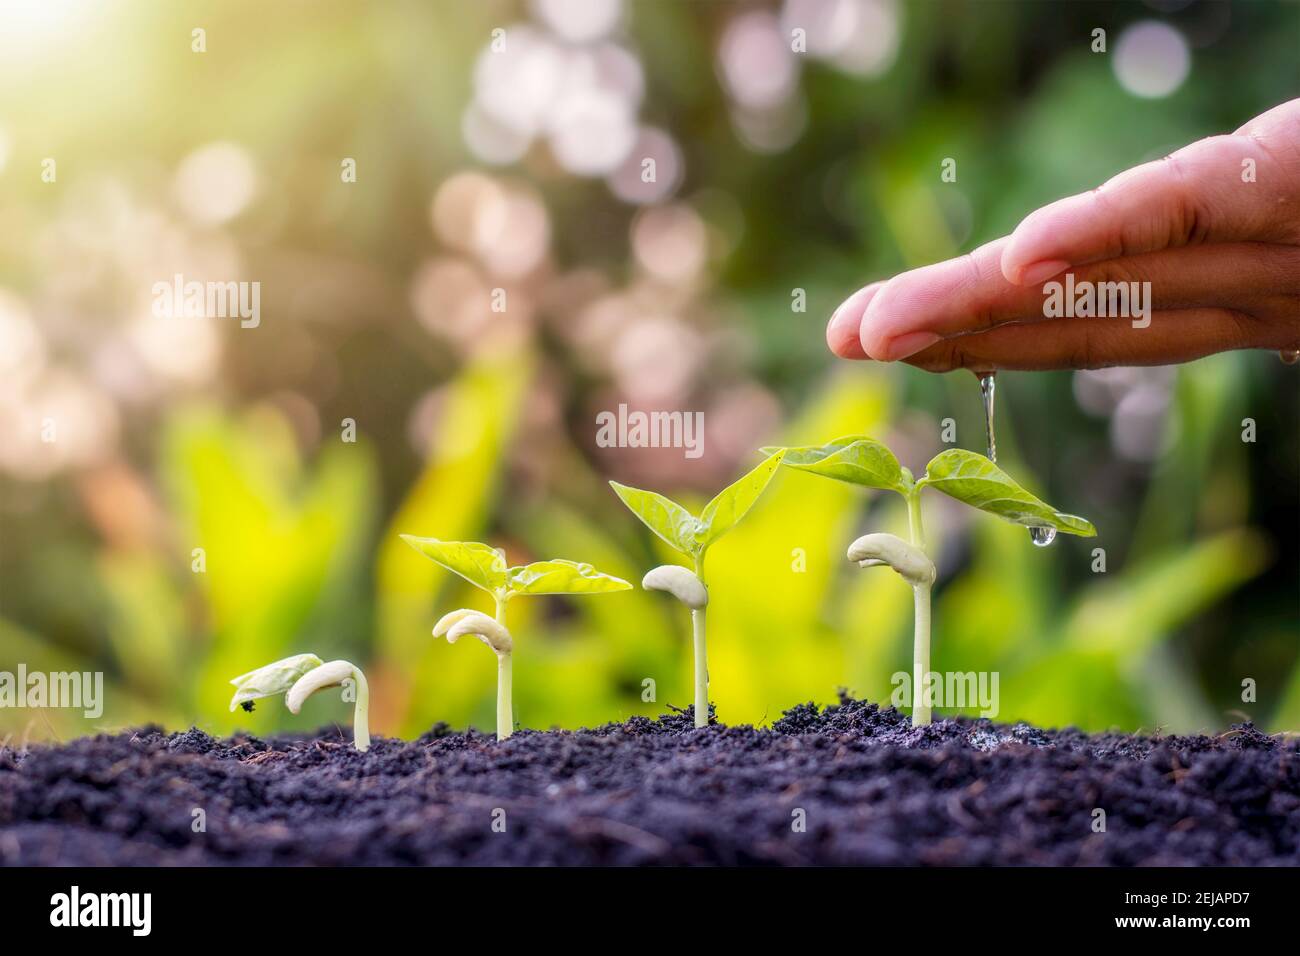 Planting plants on the soil and watering hands including showing the stage of plant growth, planting ideas and investments for farmers. Stock Photo